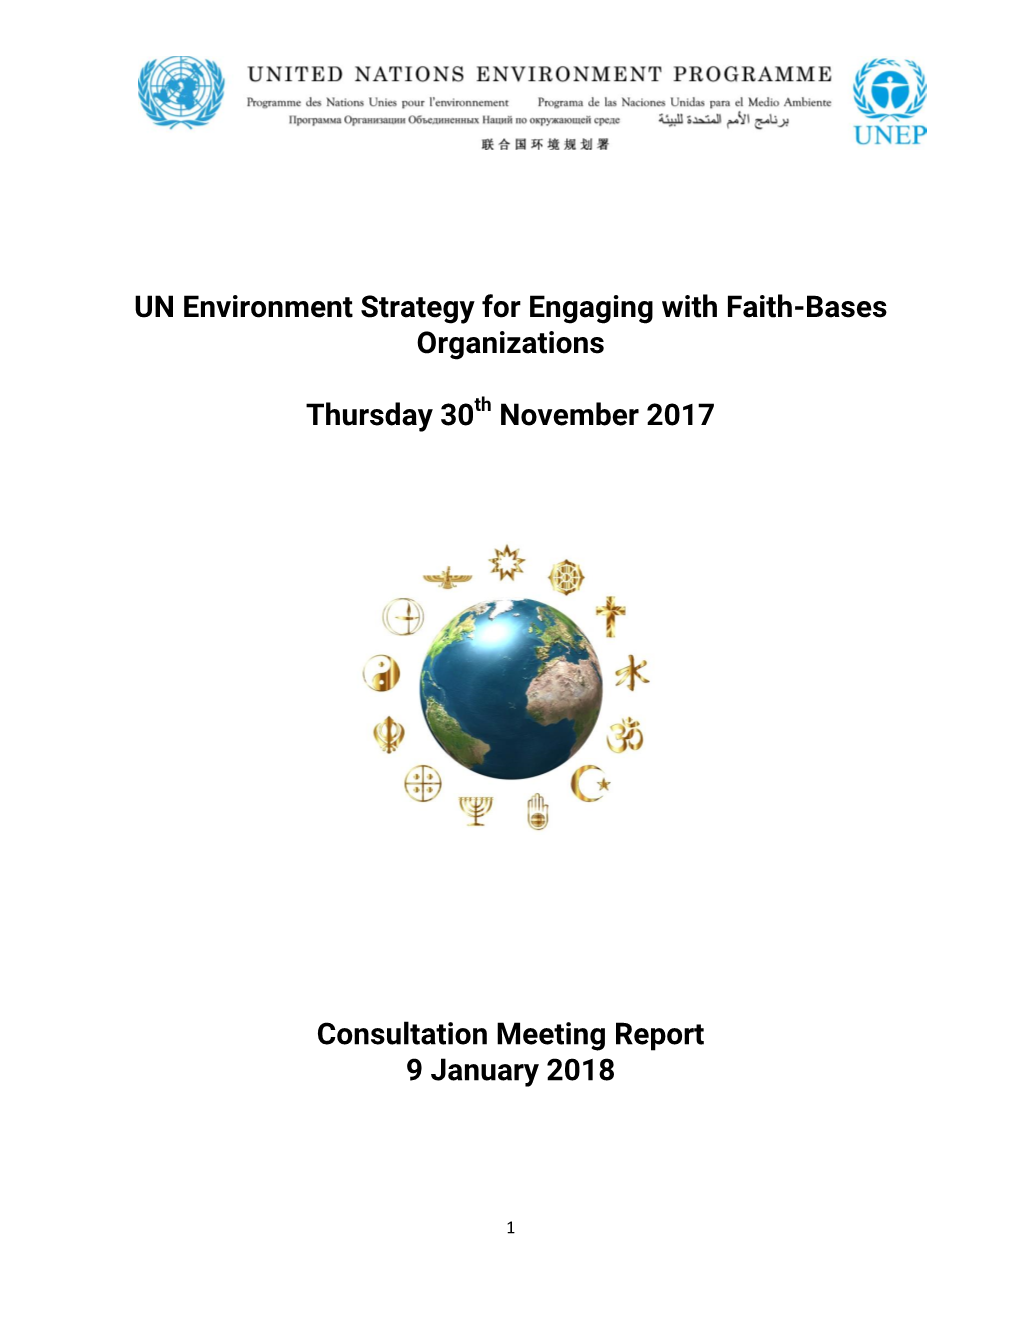 UN Environment Strategy for Engaging with Faith-Bases Organizations